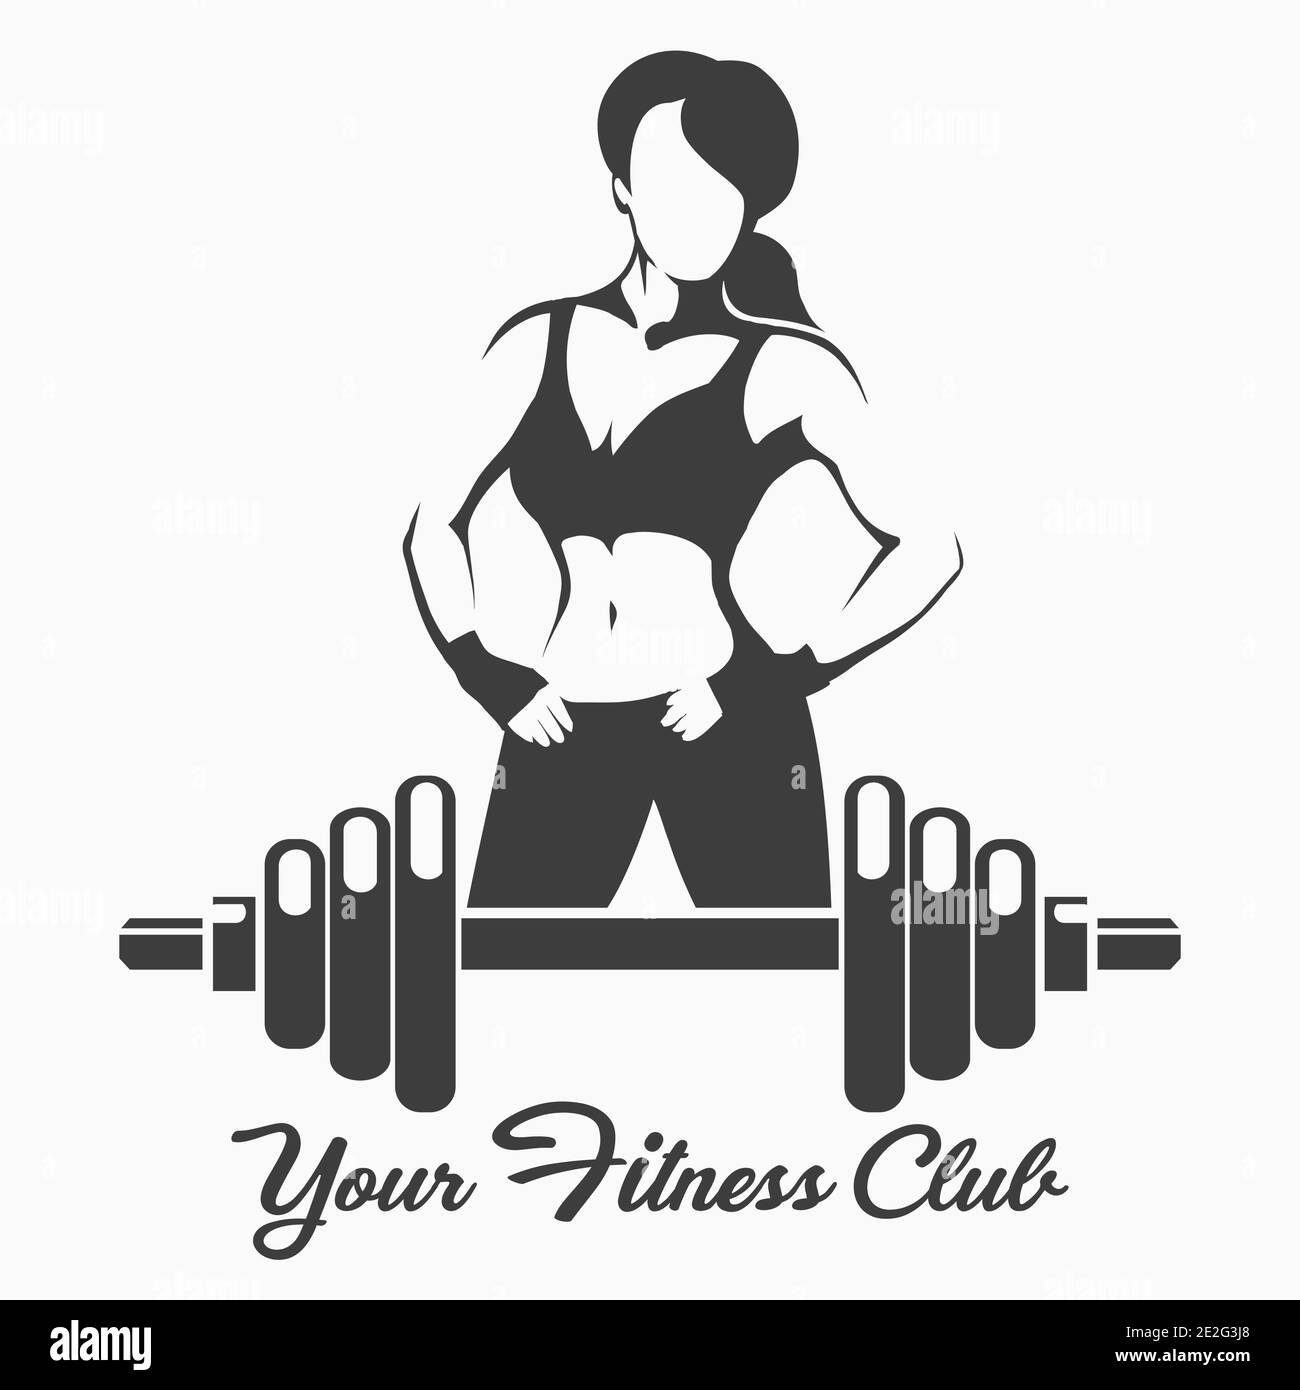 Fitness logo Black and White Stock Photos & Images - Alamy